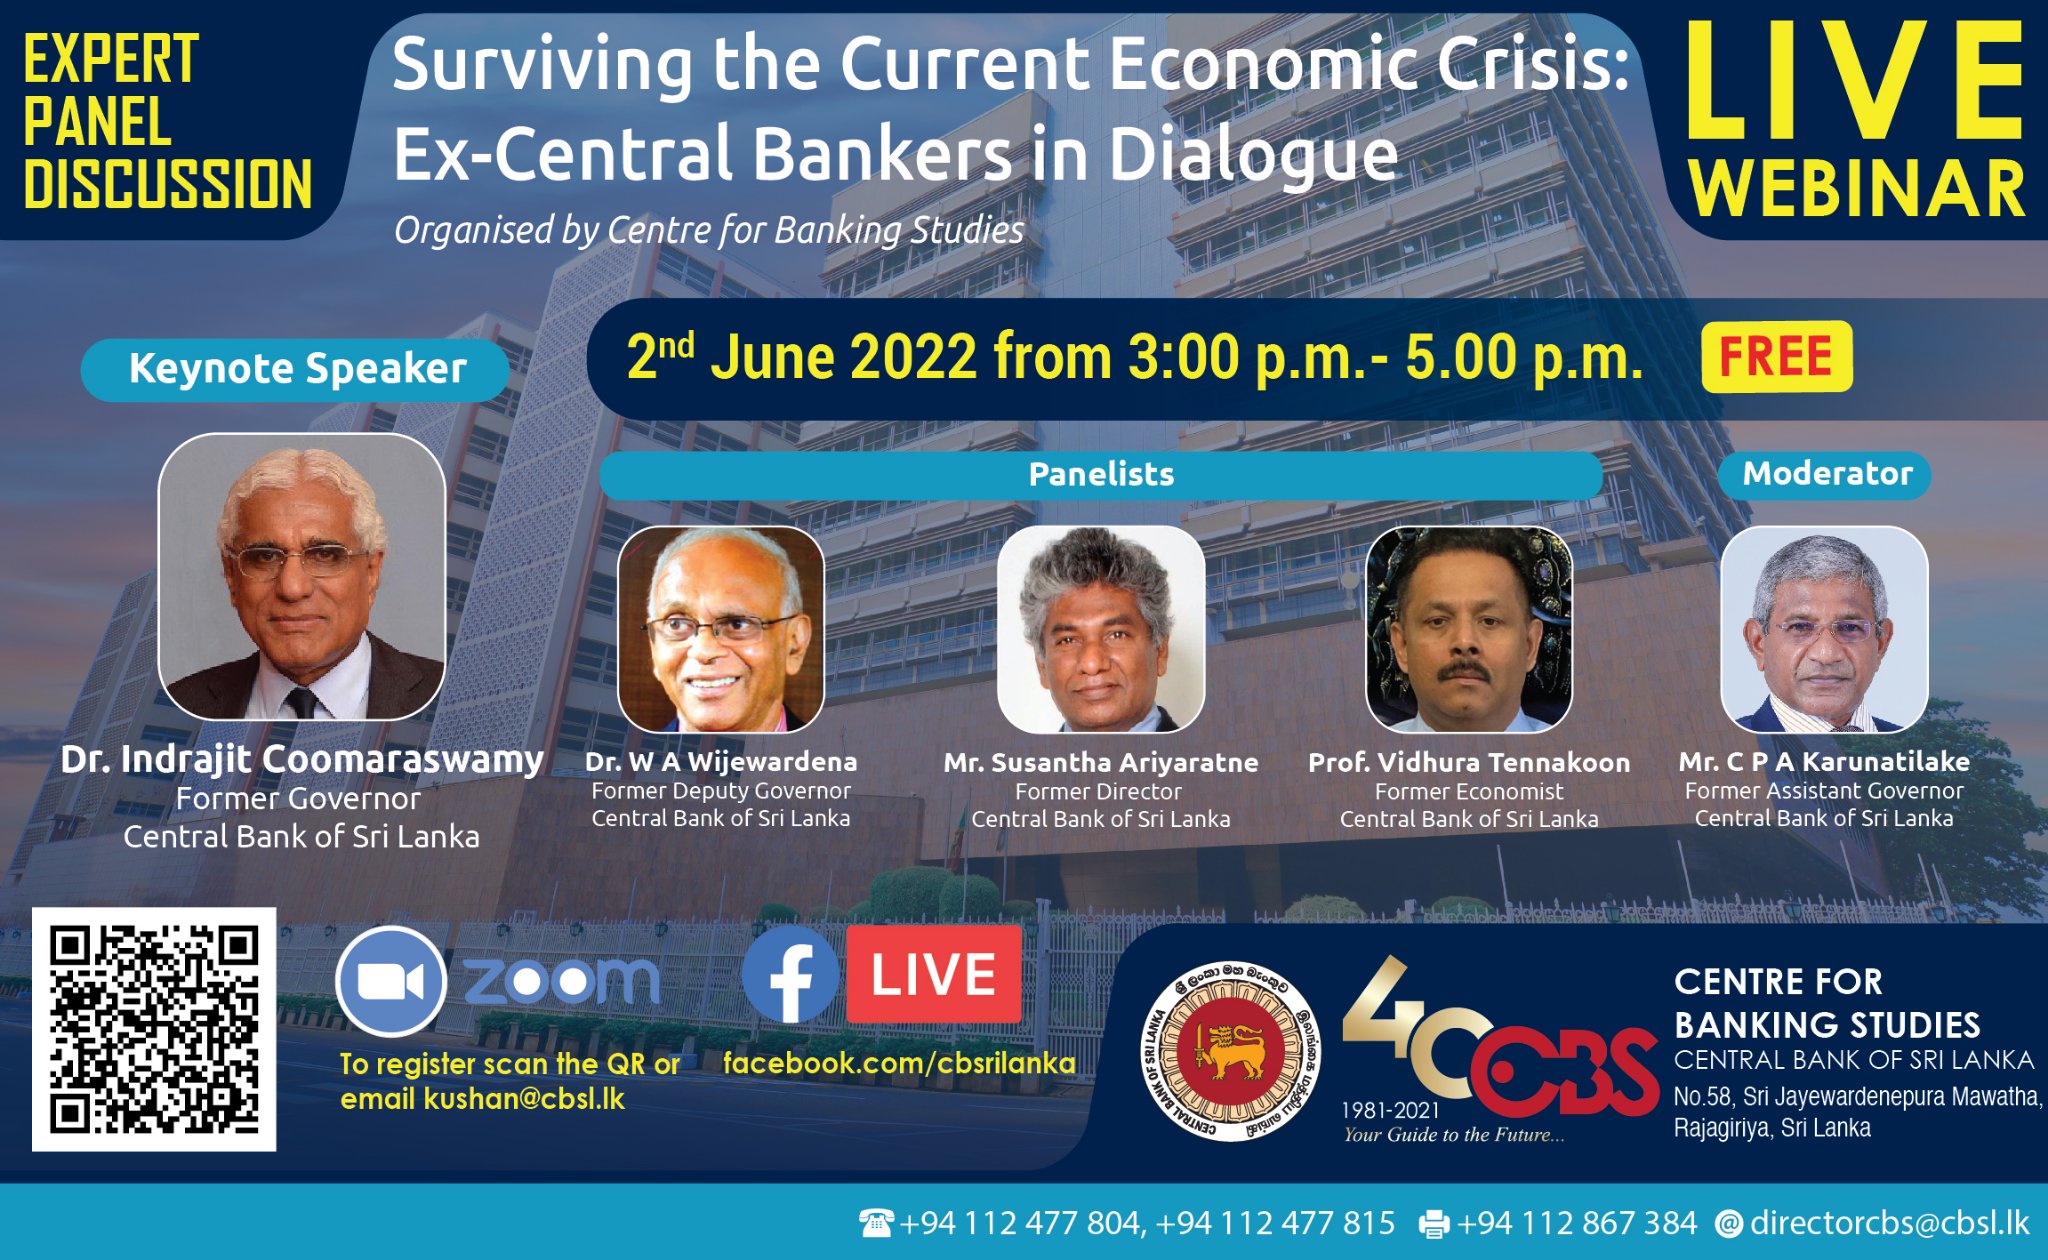 Expert Panel Discussion – “Surviving the current economic crisis: Ex-Central Bankers in Dialogue”